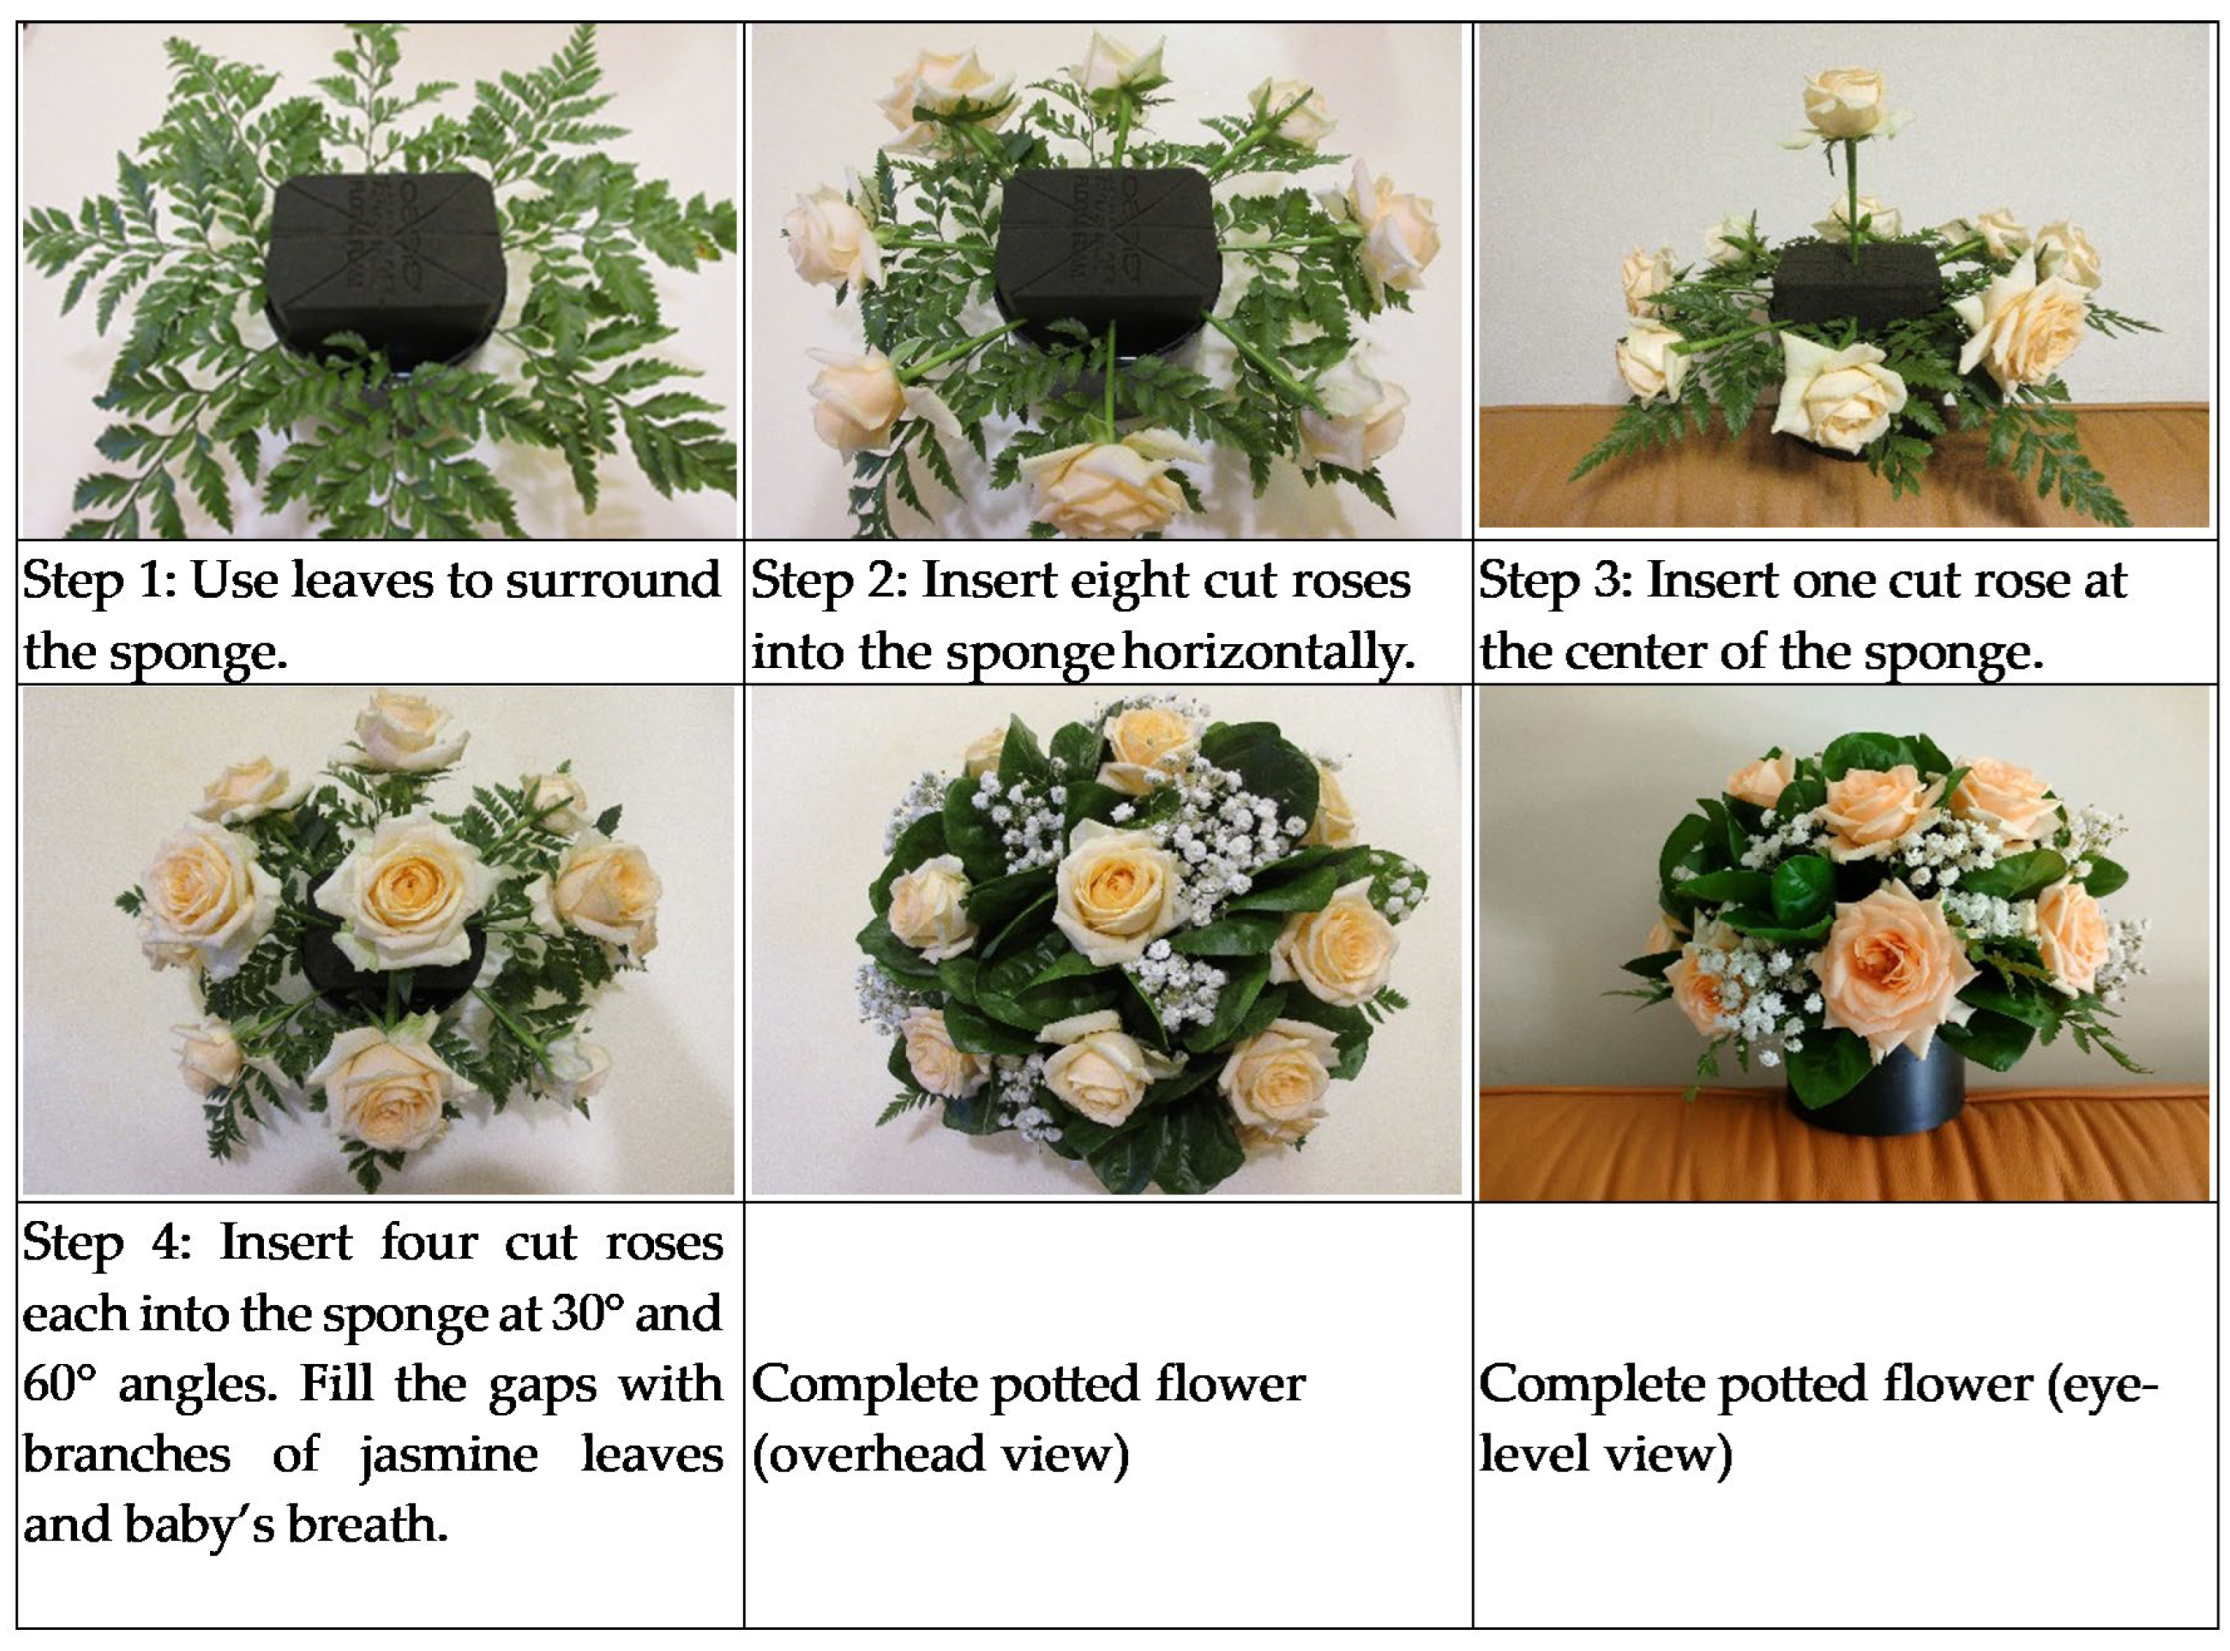 A floral experiment: 3 designers start with the same flowers. The results?  3 very different arrangements, Entertainment/Life